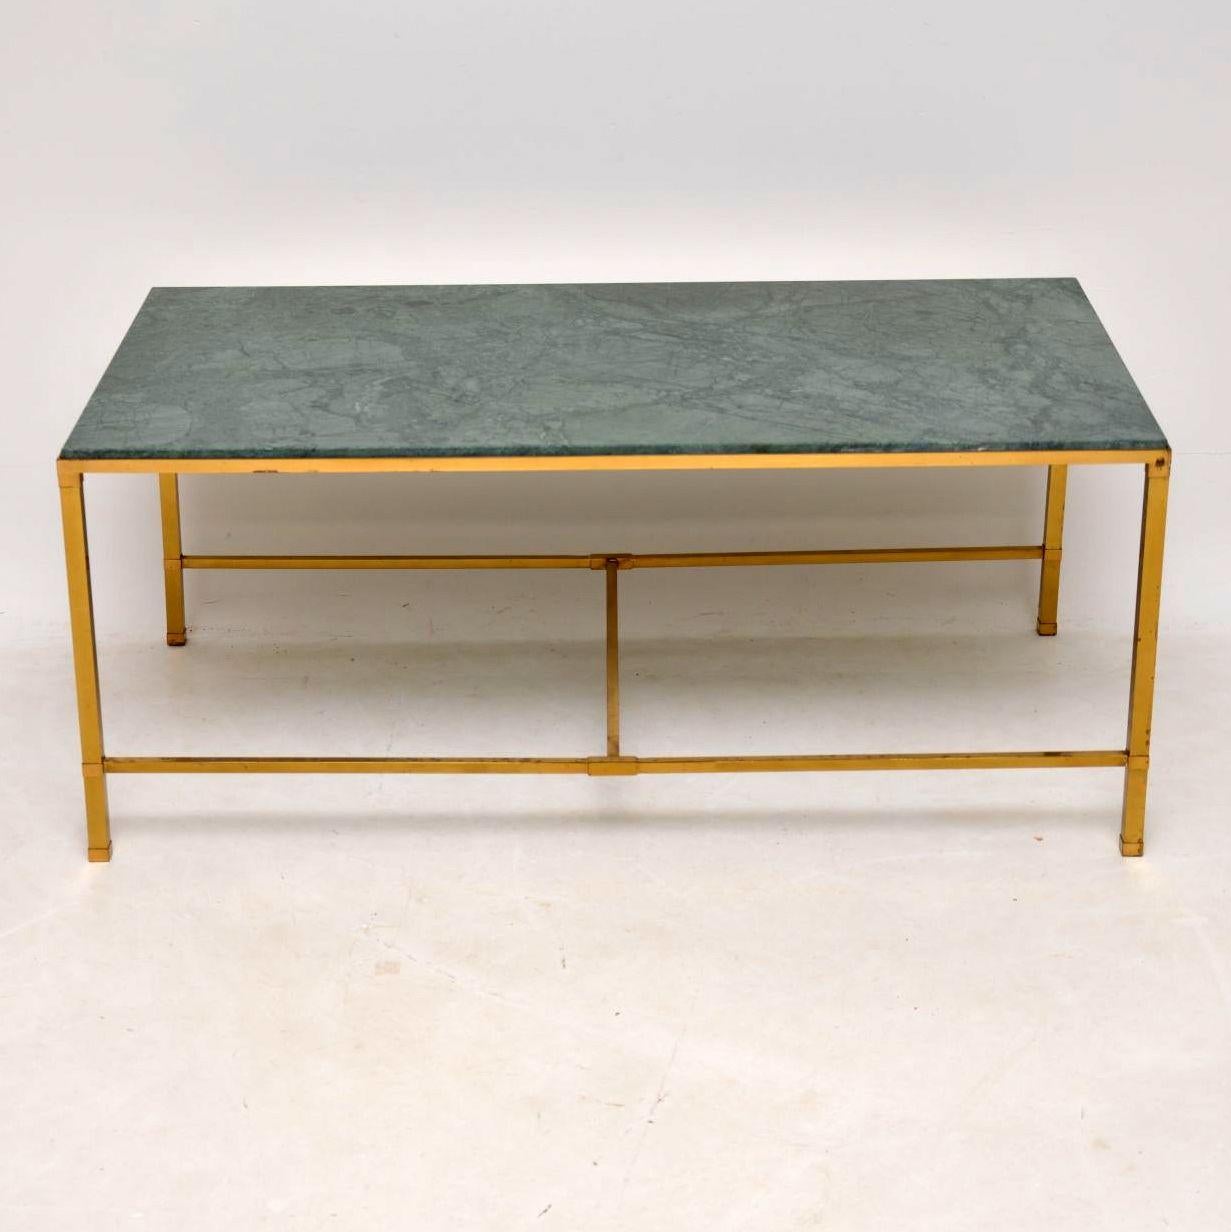 A stunning and quite large vintage coffee table with a brass frame and a beautiful green marble top. The brass frame is from the 1950s-1960s and is in very good condition; its great quality, structurally sound with no damage and nice patina. We have